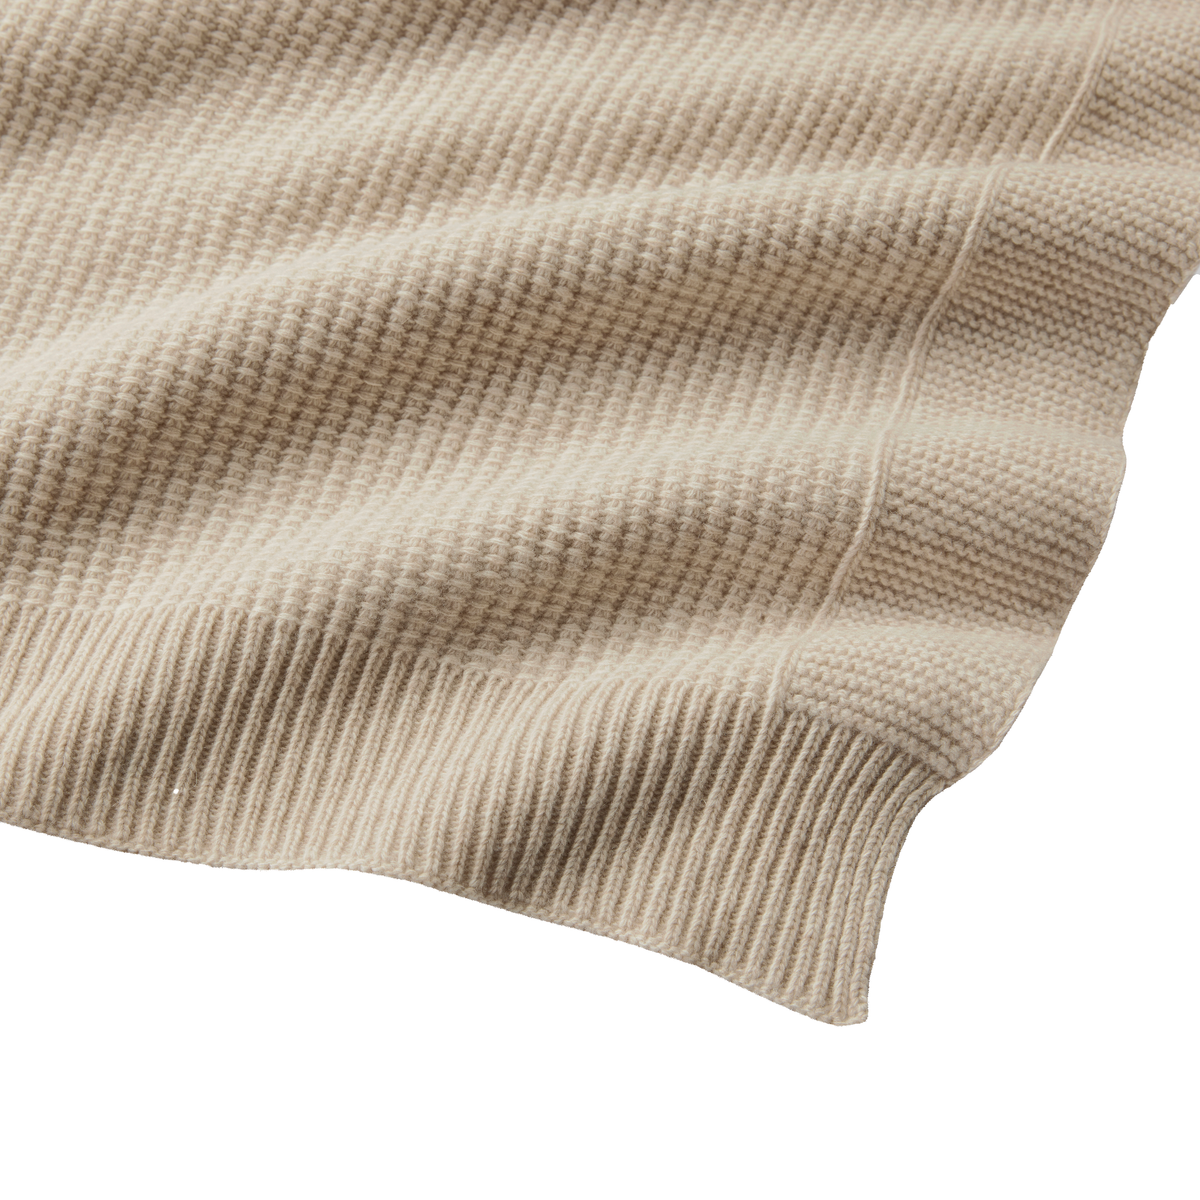 Detailed Image of Sferra Pettra Throw in Beige Color